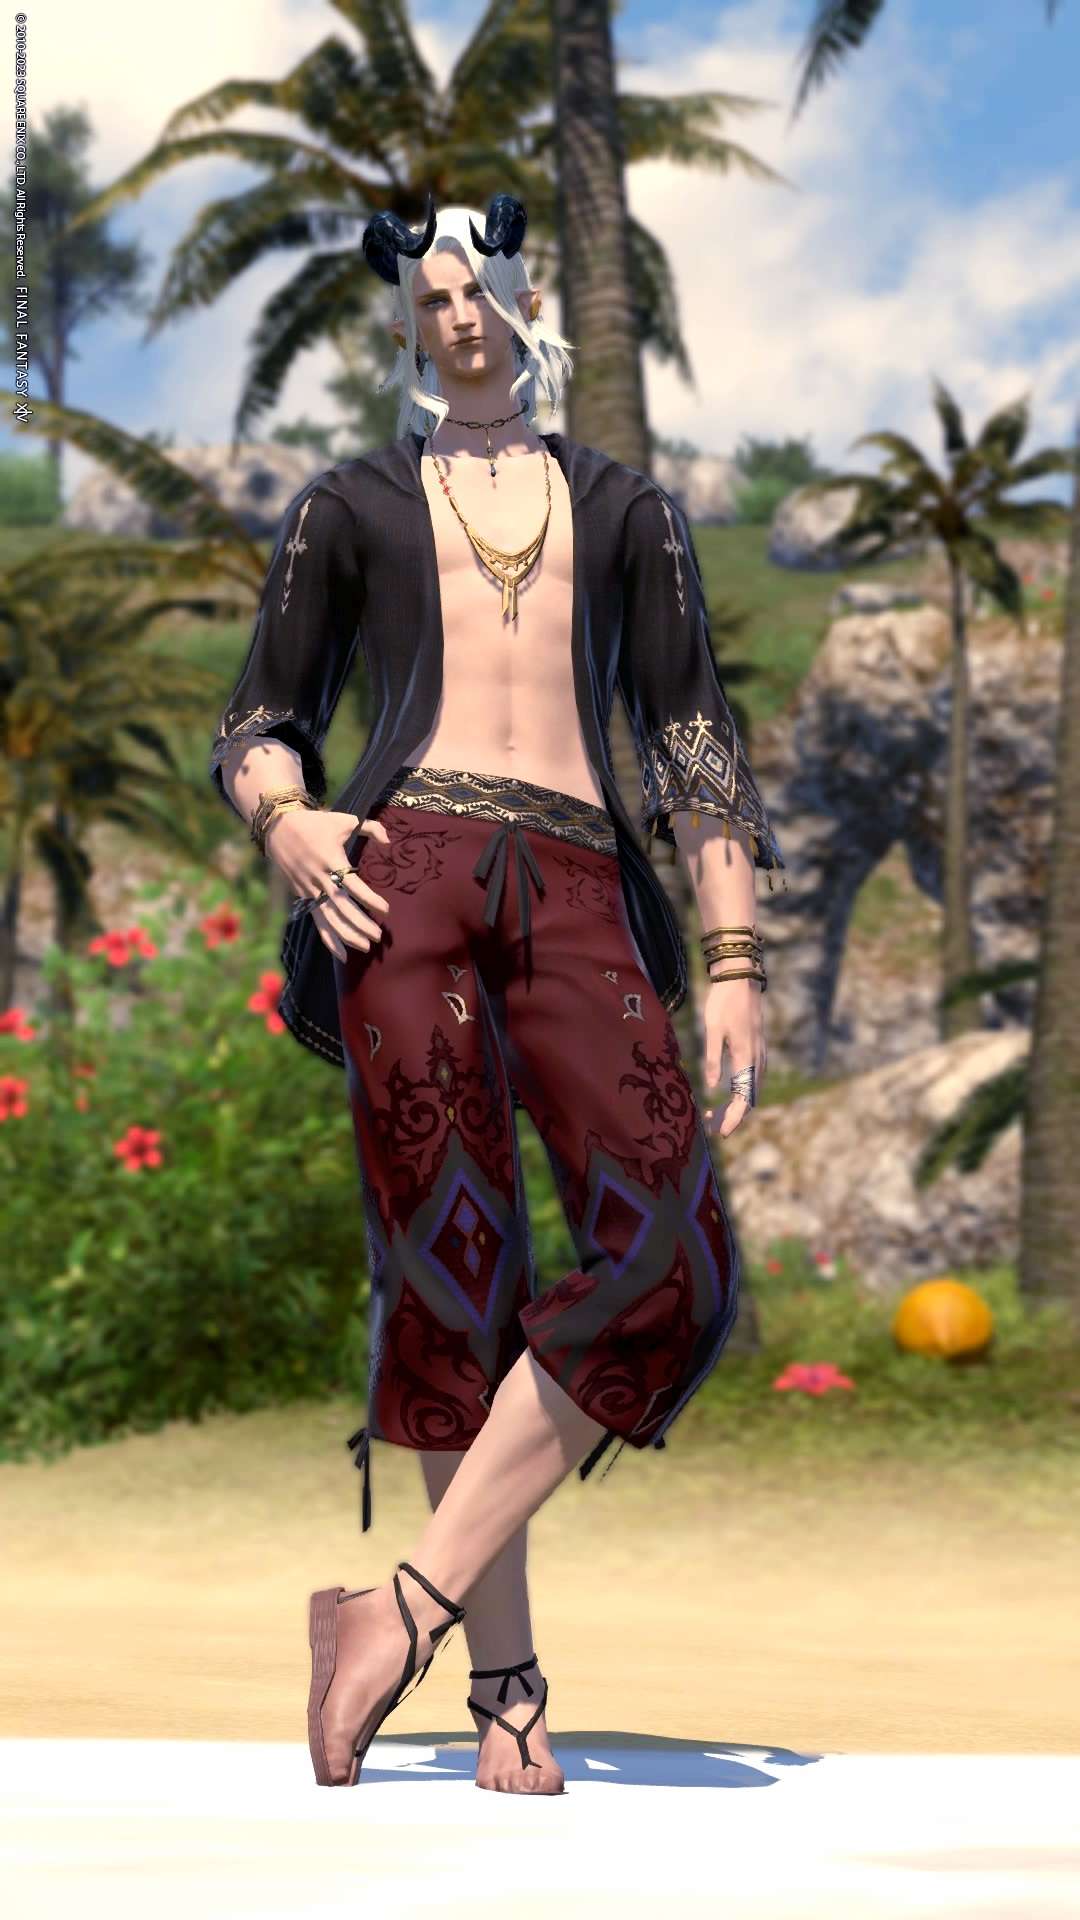 An image of an Elezen from FFXIV. He is standing on a beach in front of a landscaped background, wearing swim drunks and an open shirt.